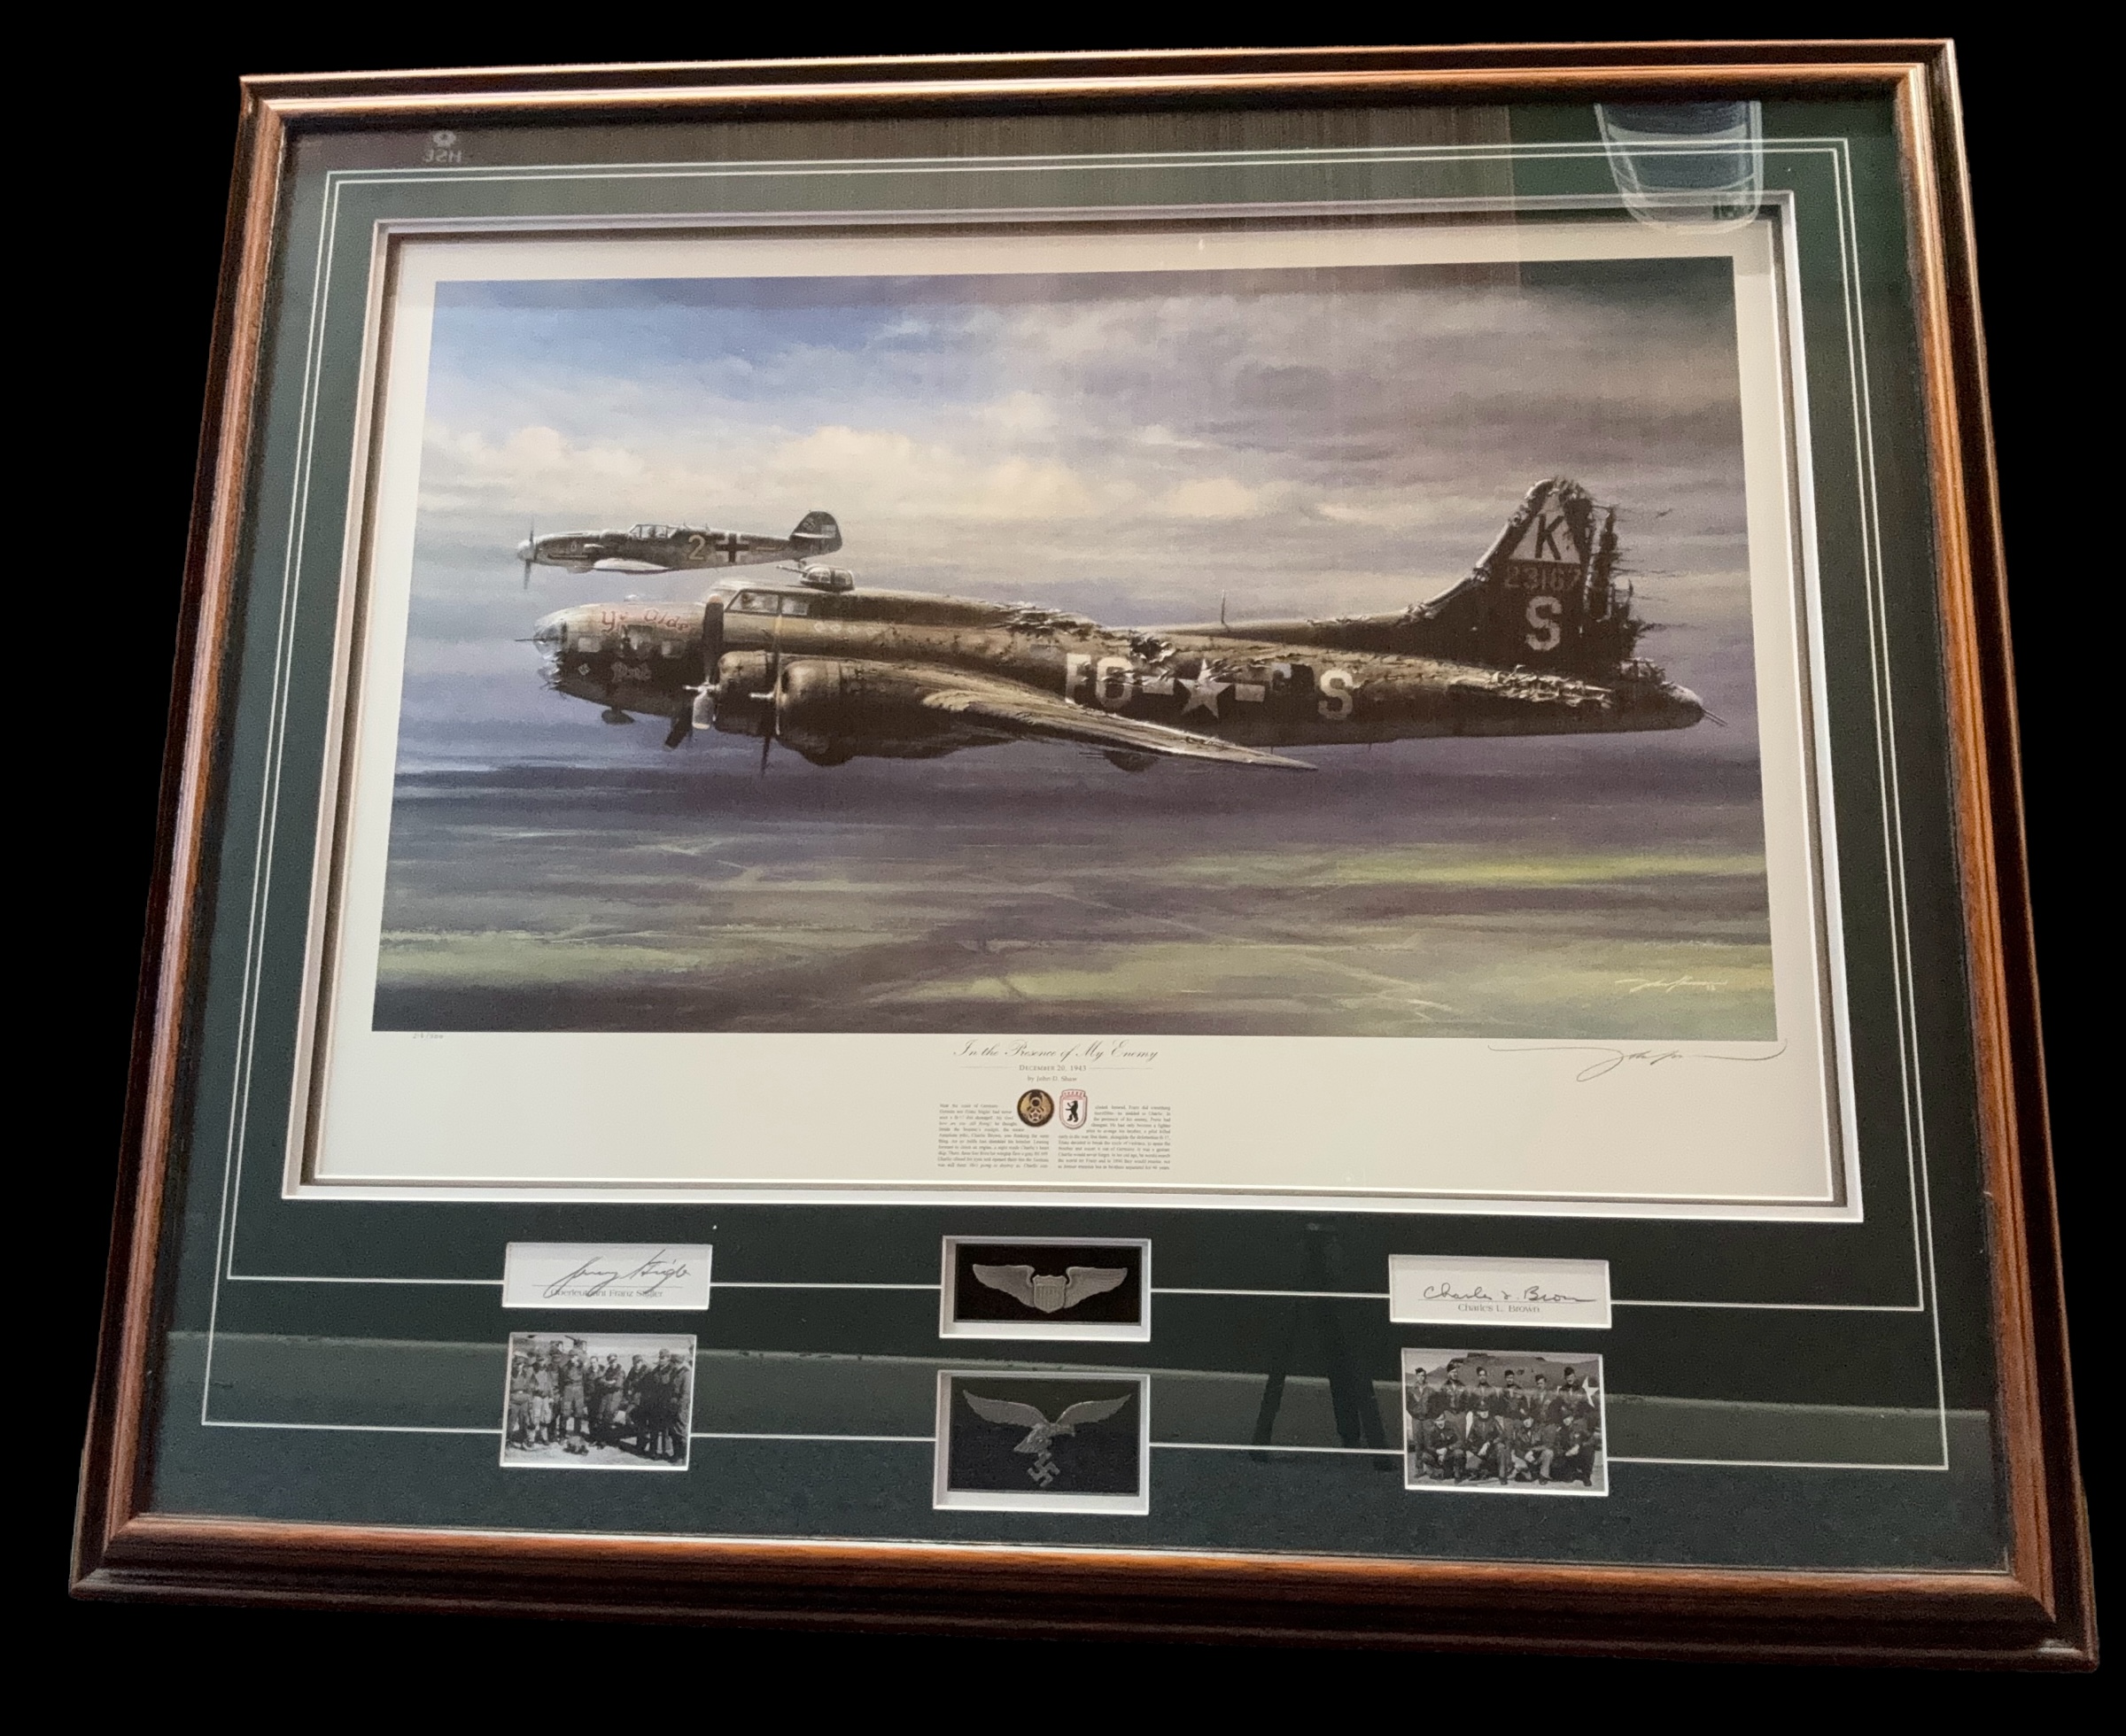 WW 2 Print titled IN THE PRESENCE OF MY ENEMY - FRAMED COLLECTOR'S PIECE by John D Limited 218/ - Image 2 of 3